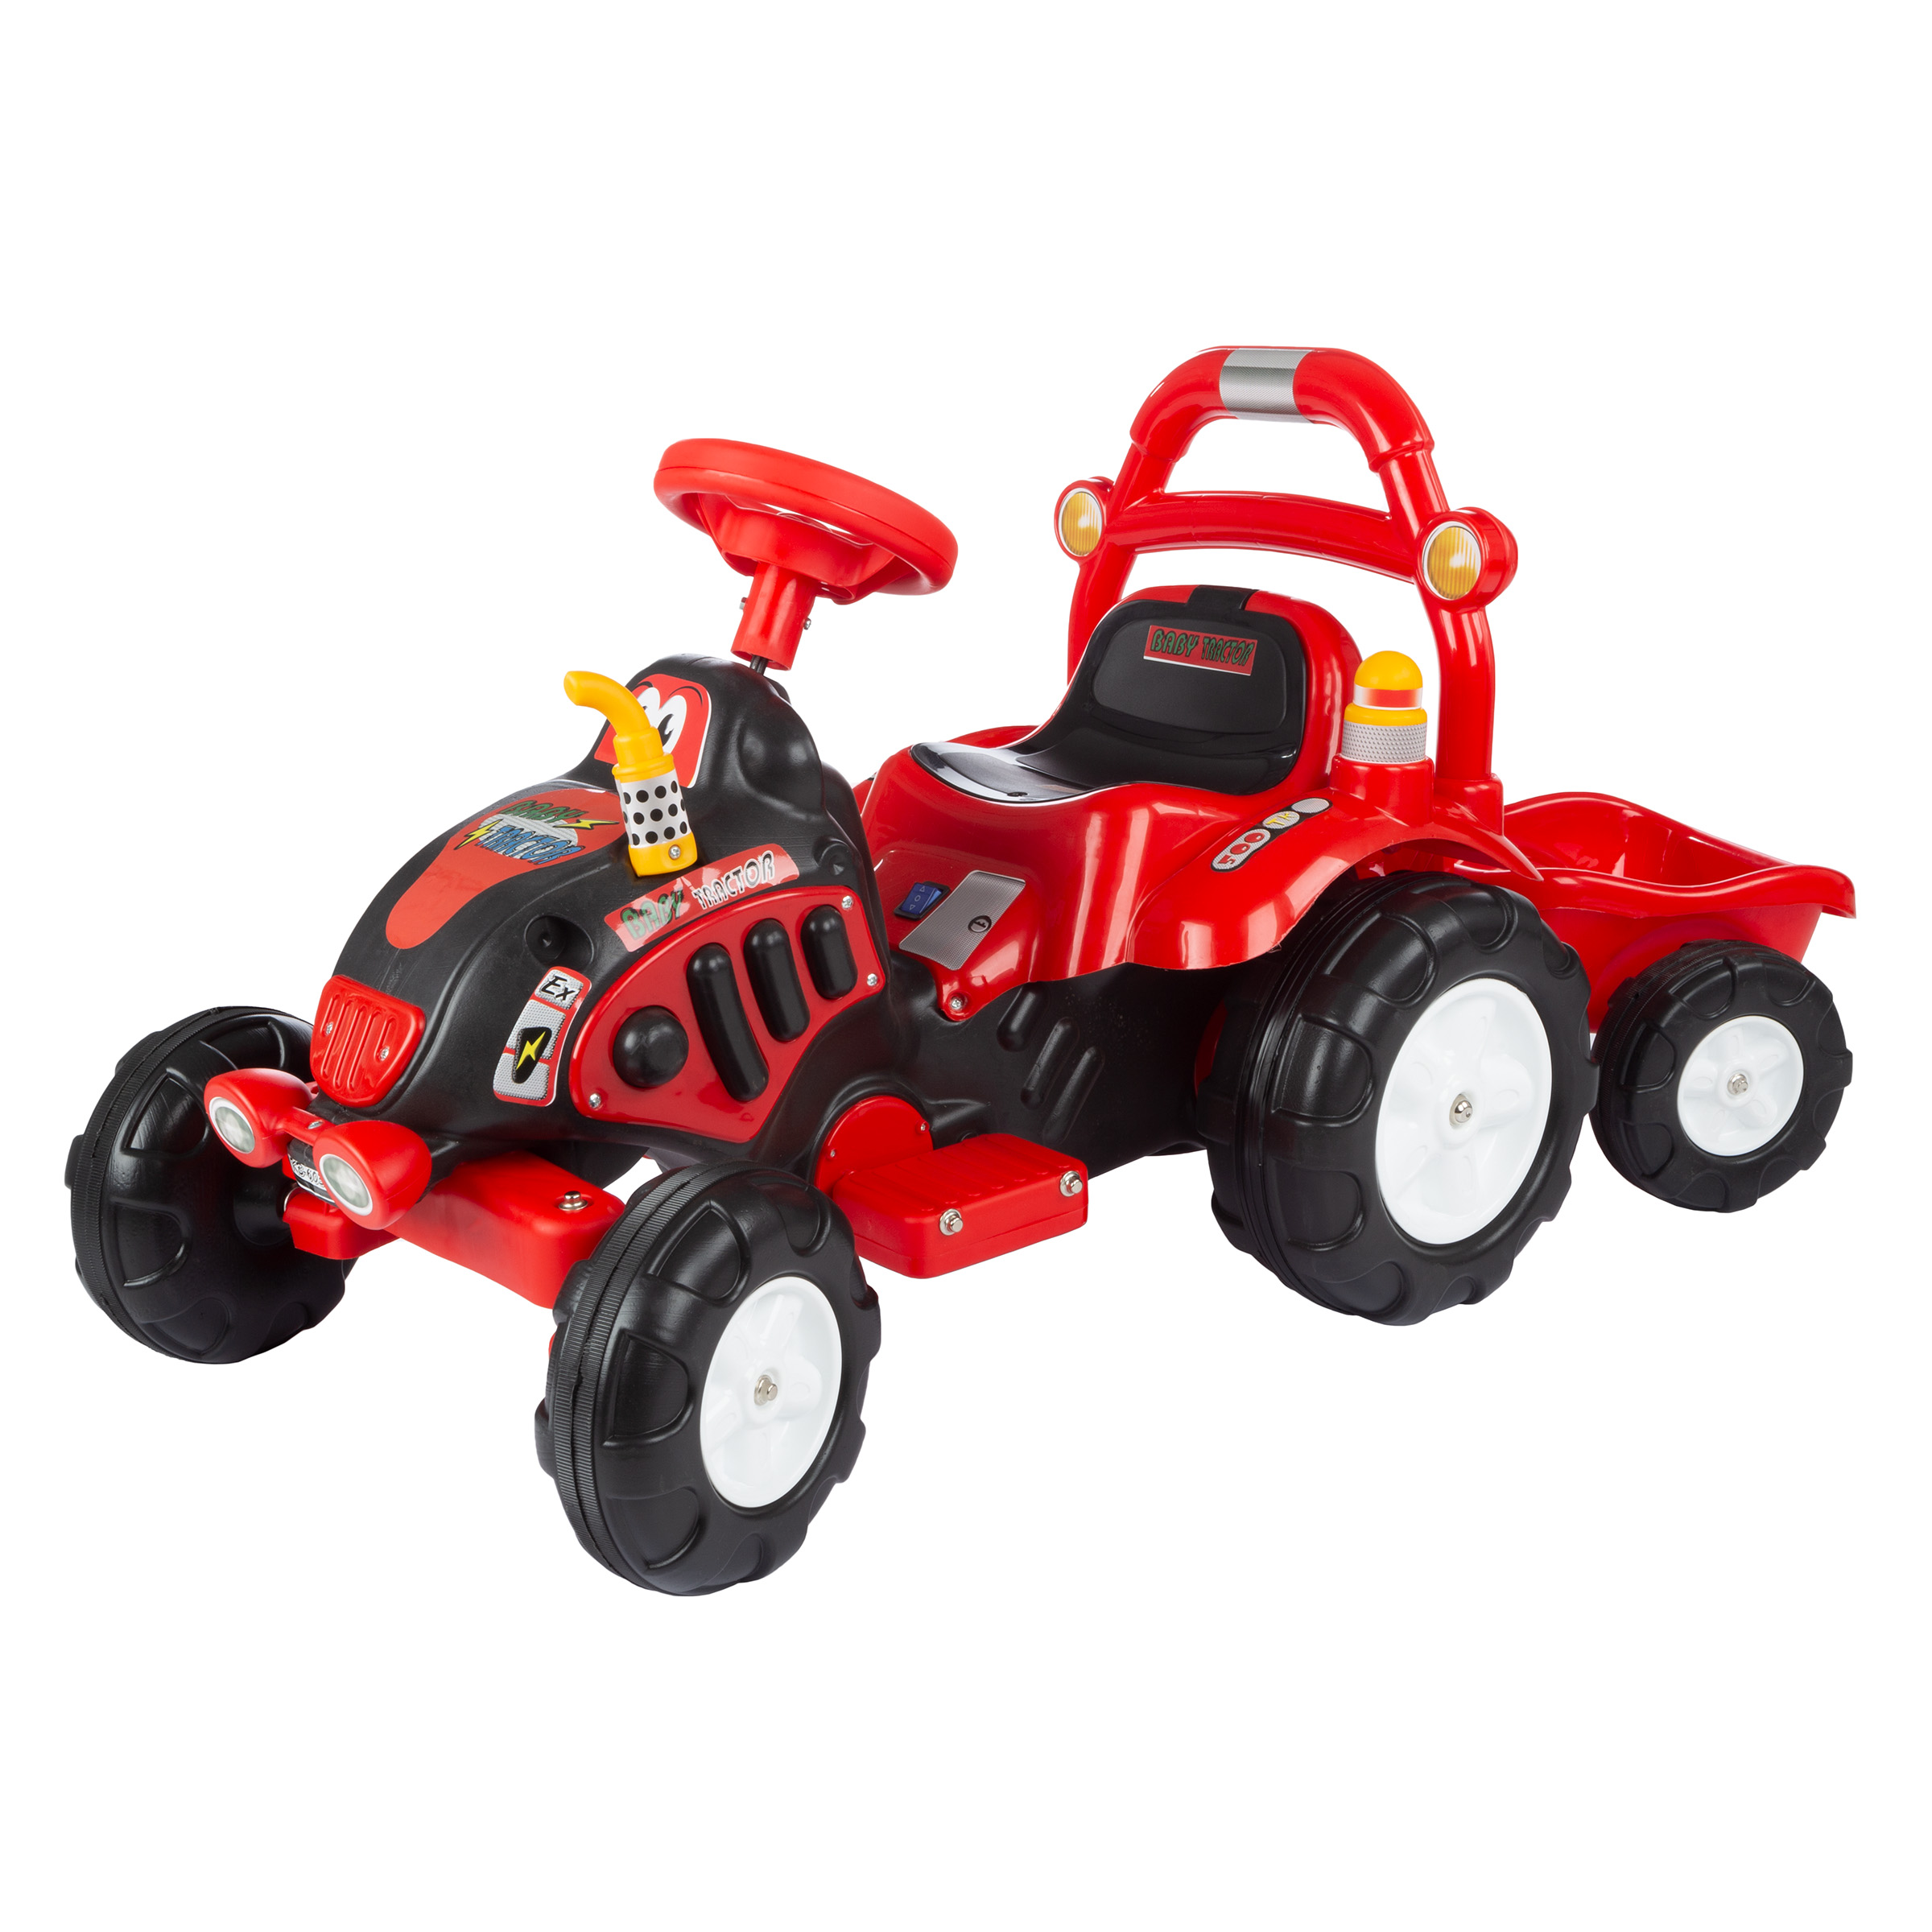 Rockin’ Rollers Ride On Toy Tractor and Trailer Battery Powered Ride On Toy